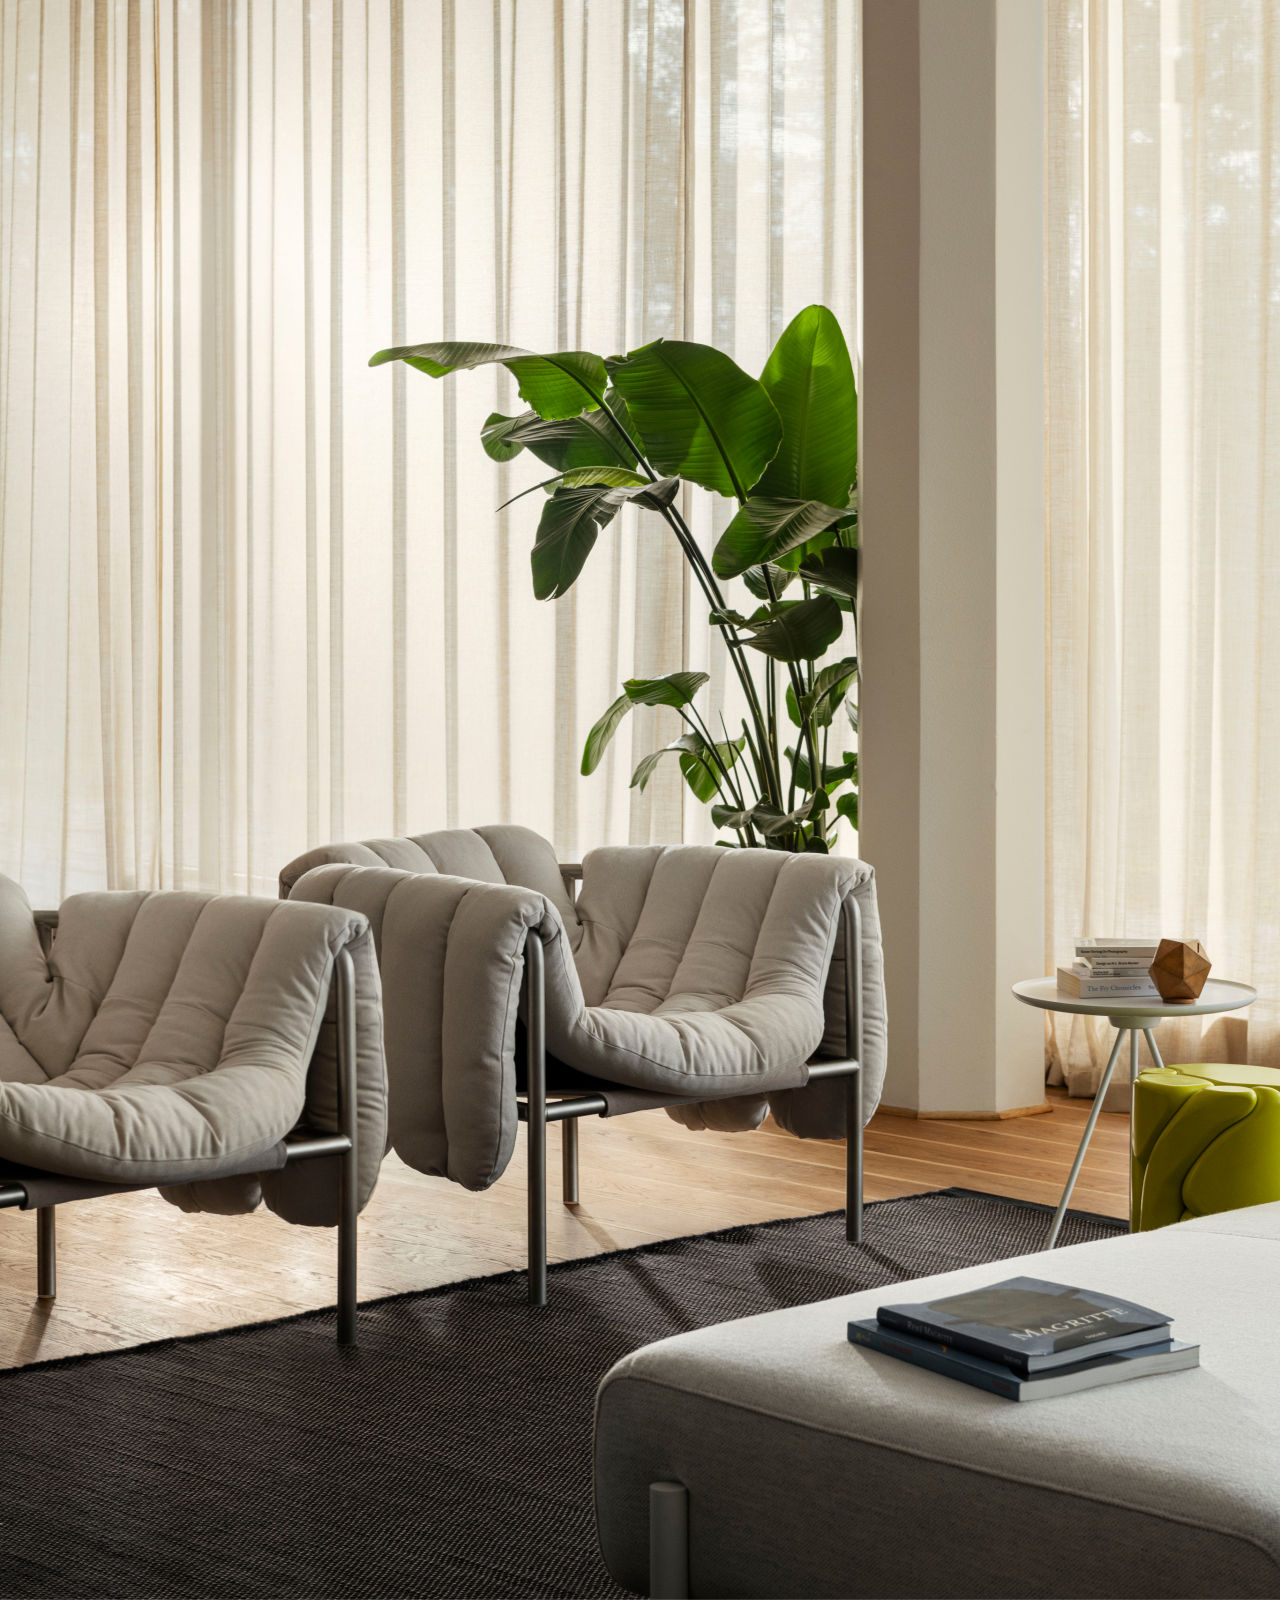 A lifestyle image of a lounge scene featuring Puffy Lounge Chair, Dune Rug, Palo Modular Sofa, and Key Side Table.